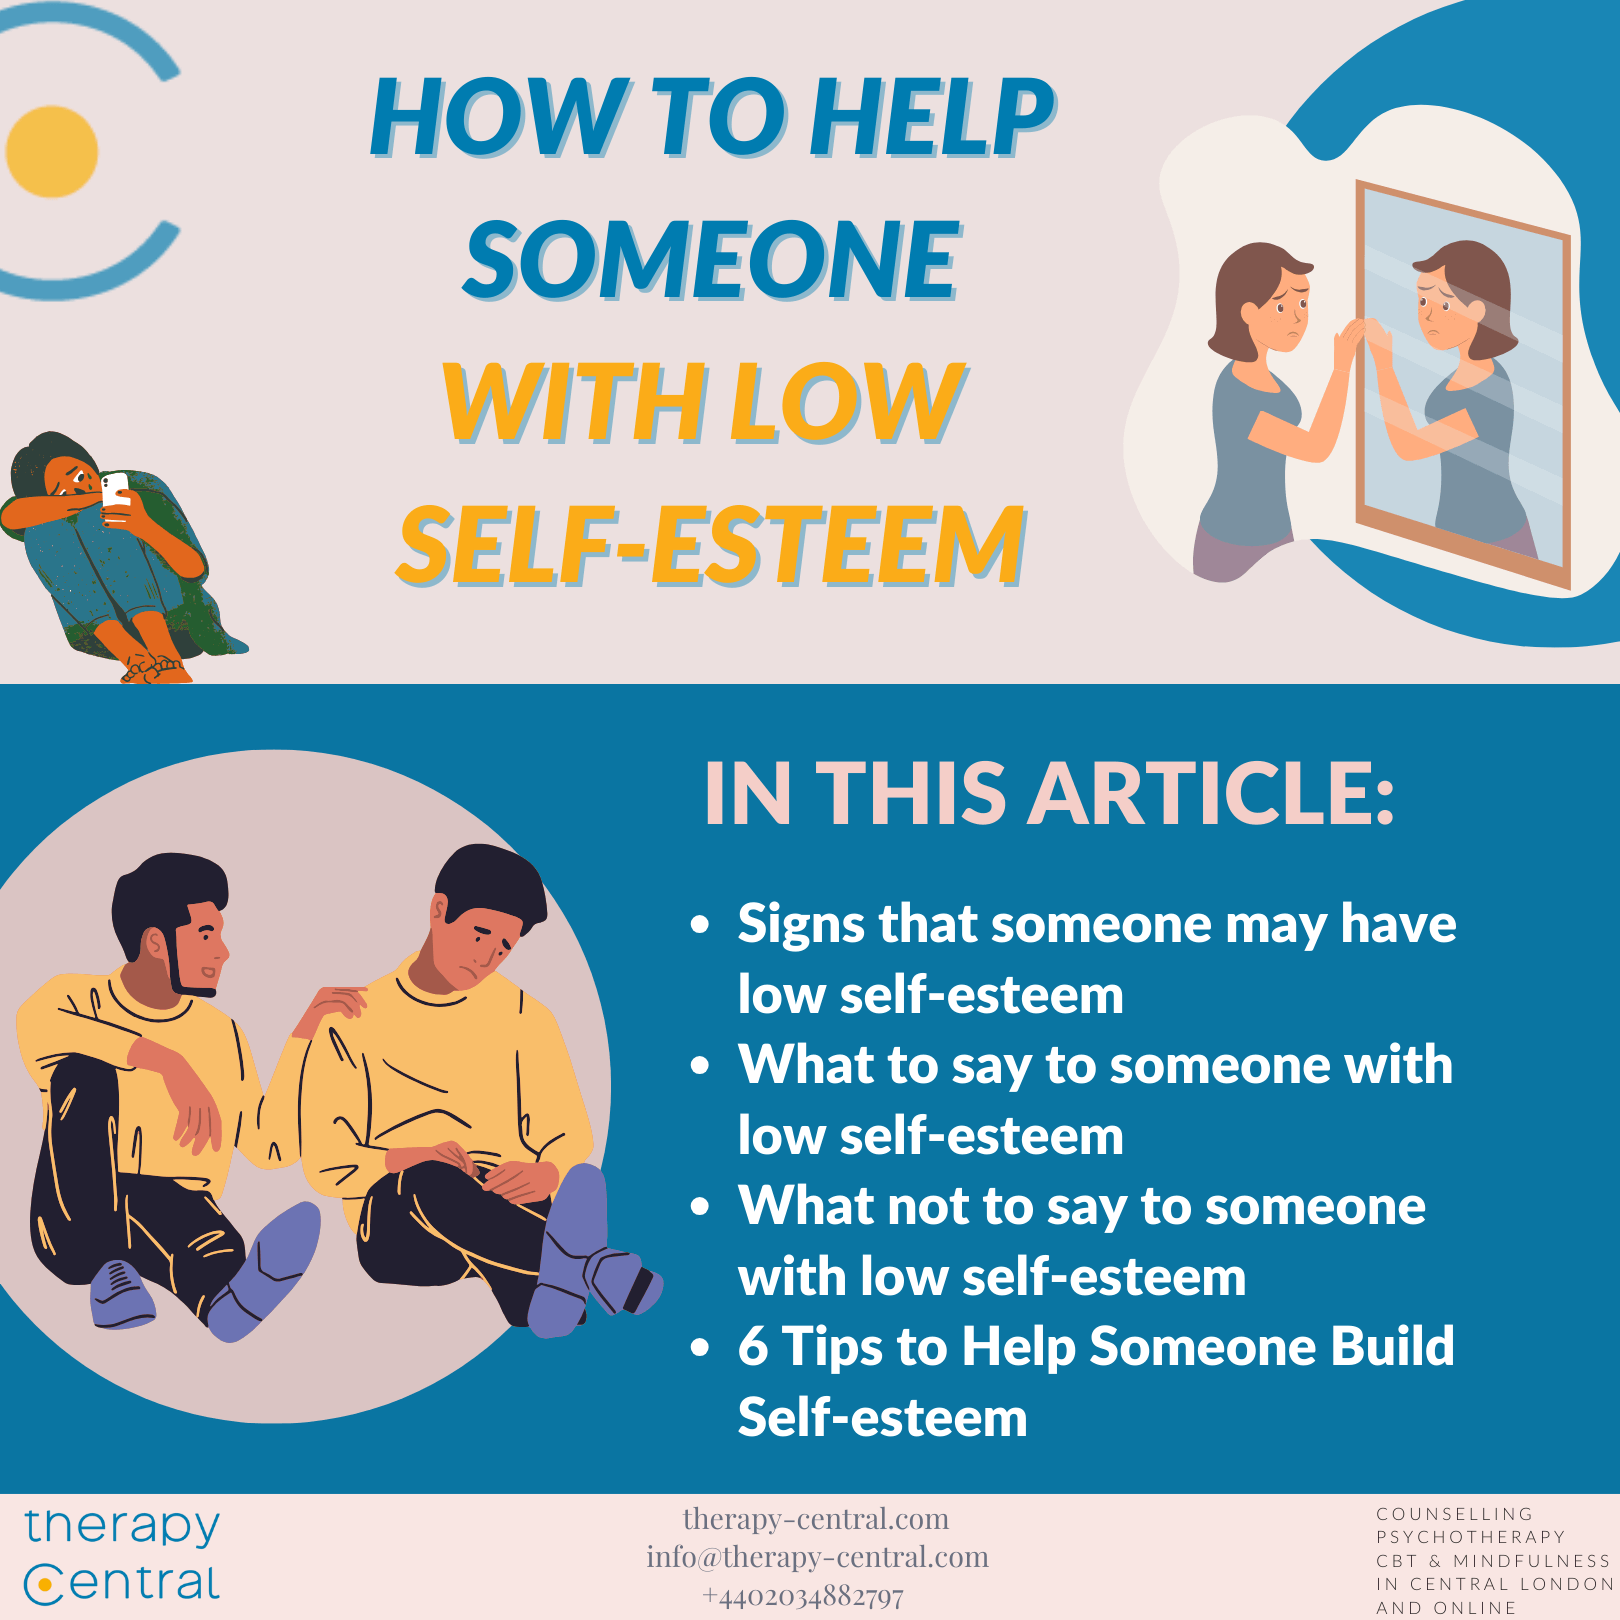 How to Help Someone with Low Self-Esteem